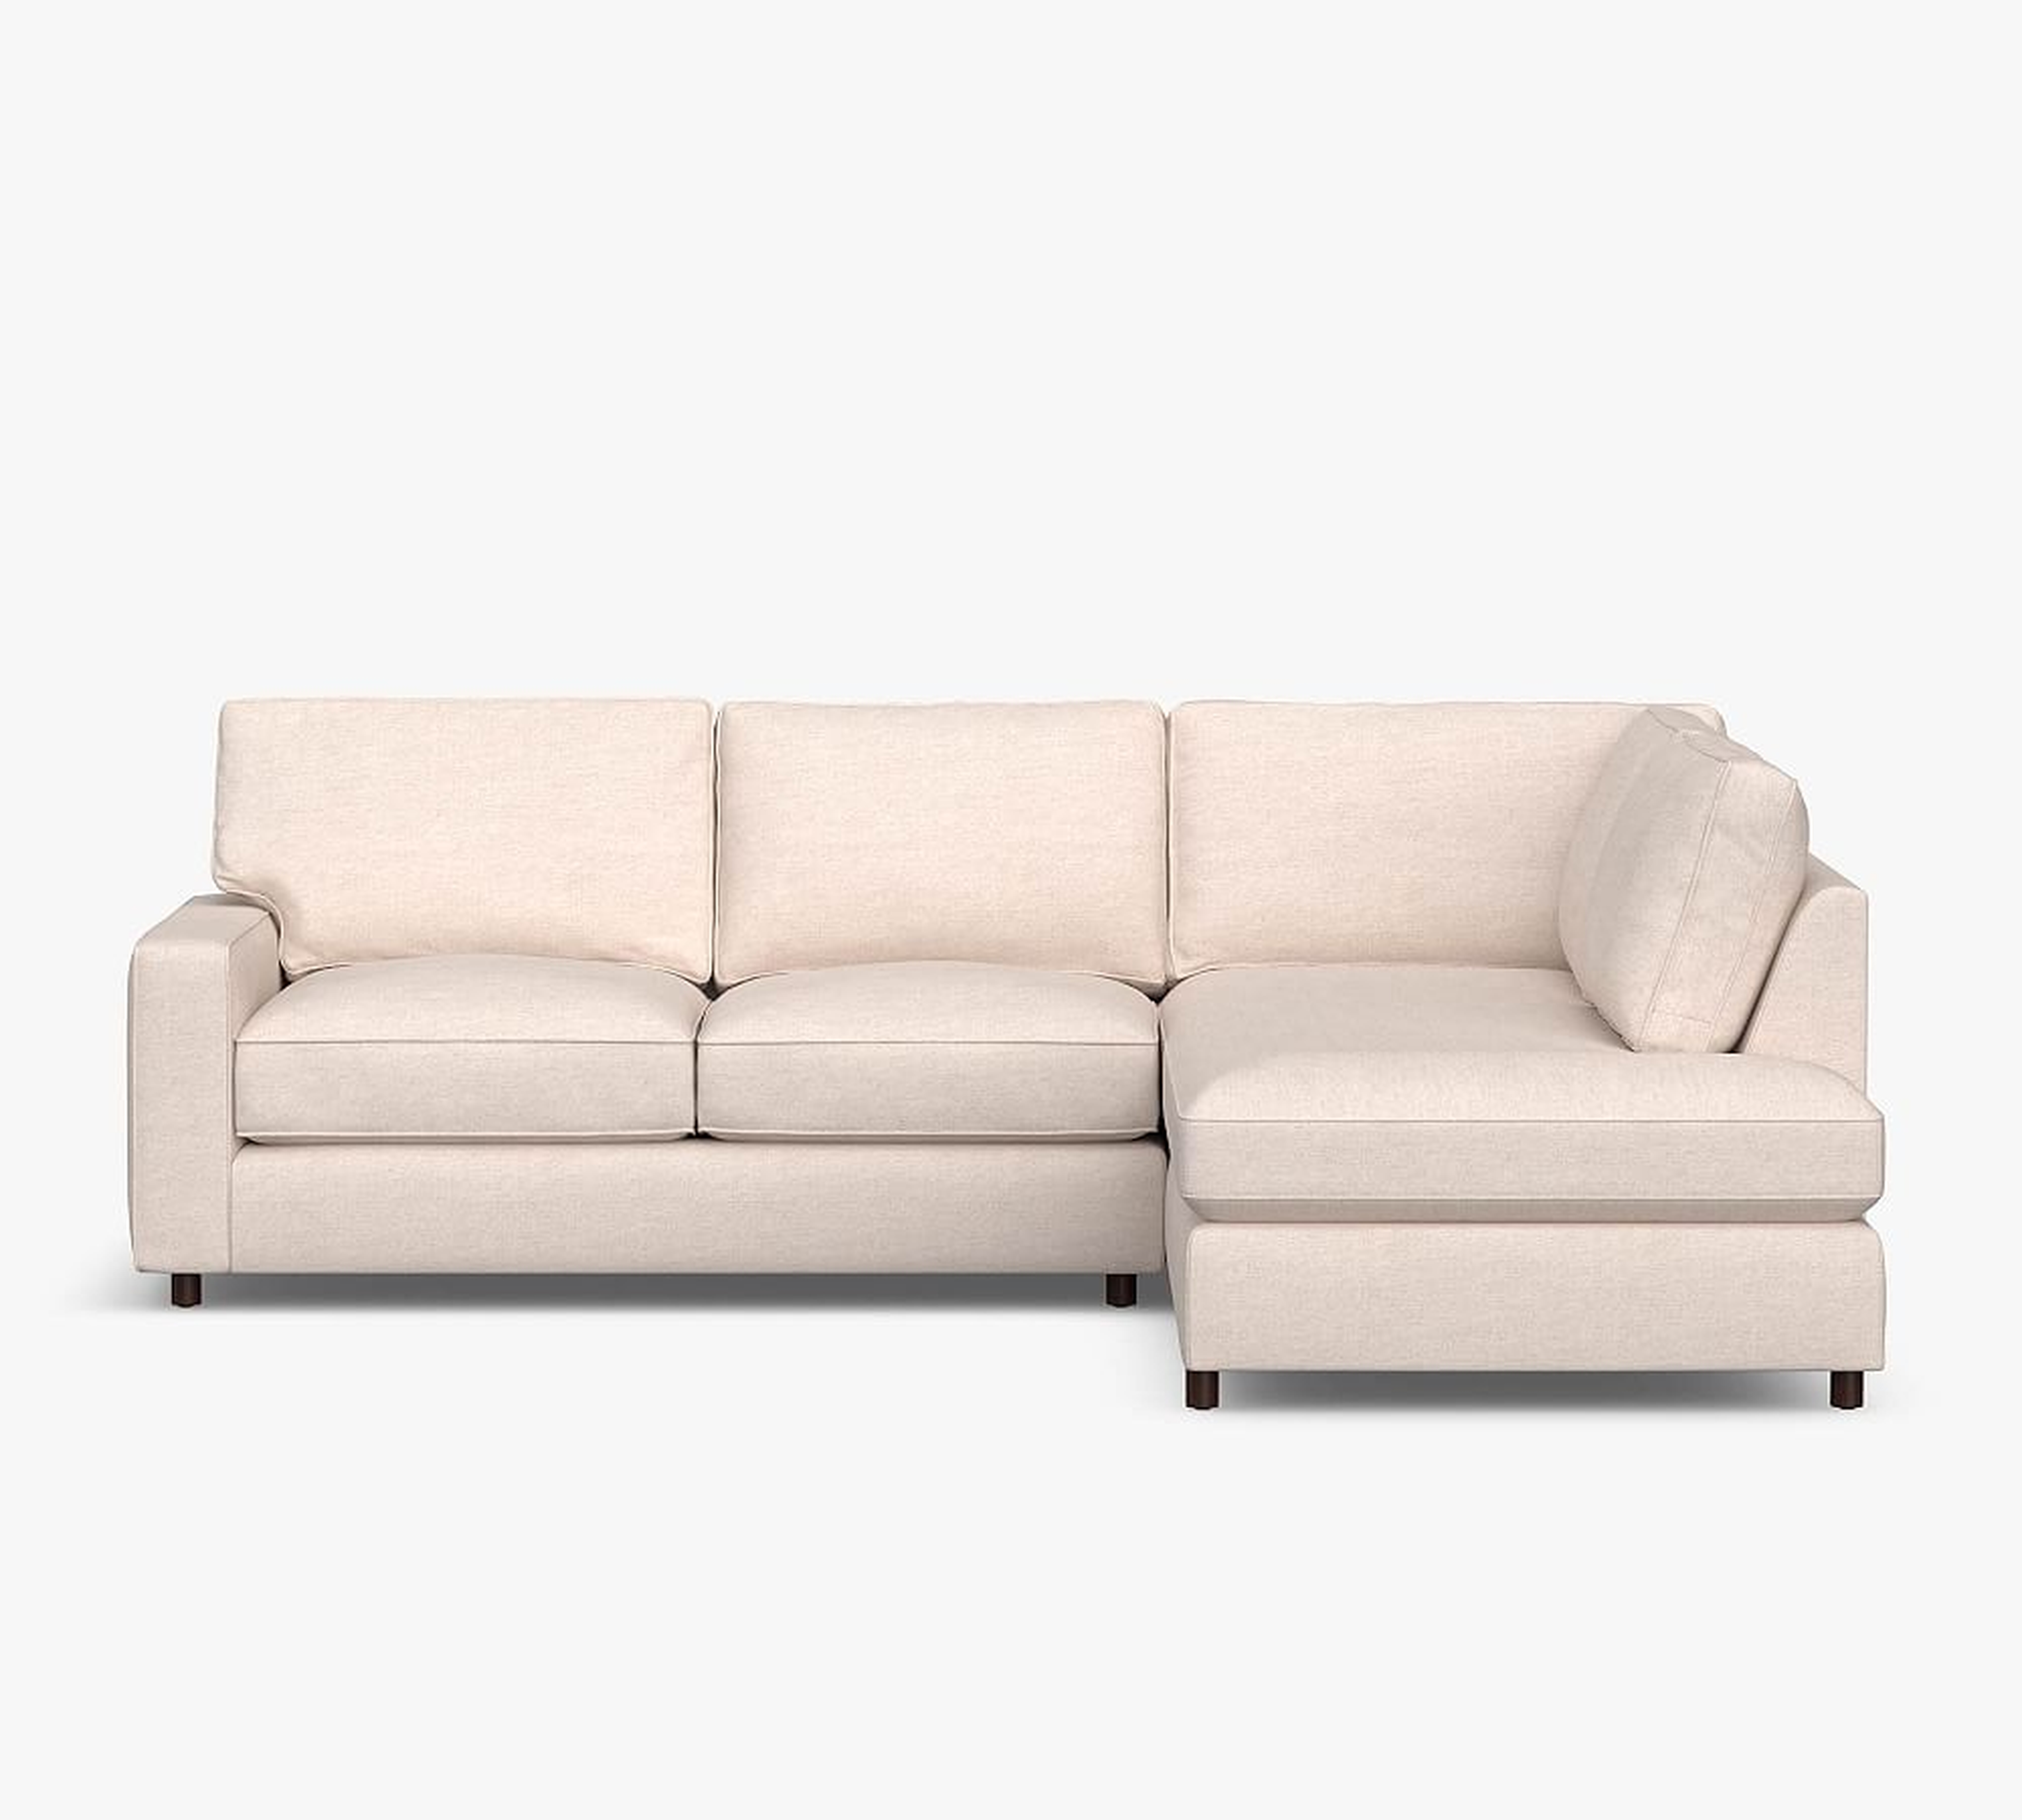 PB Comfort Square Arm Upholstered Left Sofa Return Bumper Sectional, Box Edge, Down Blend Wrapped Cushions, Performance Heathered Basketweave Platinum - Pottery Barn